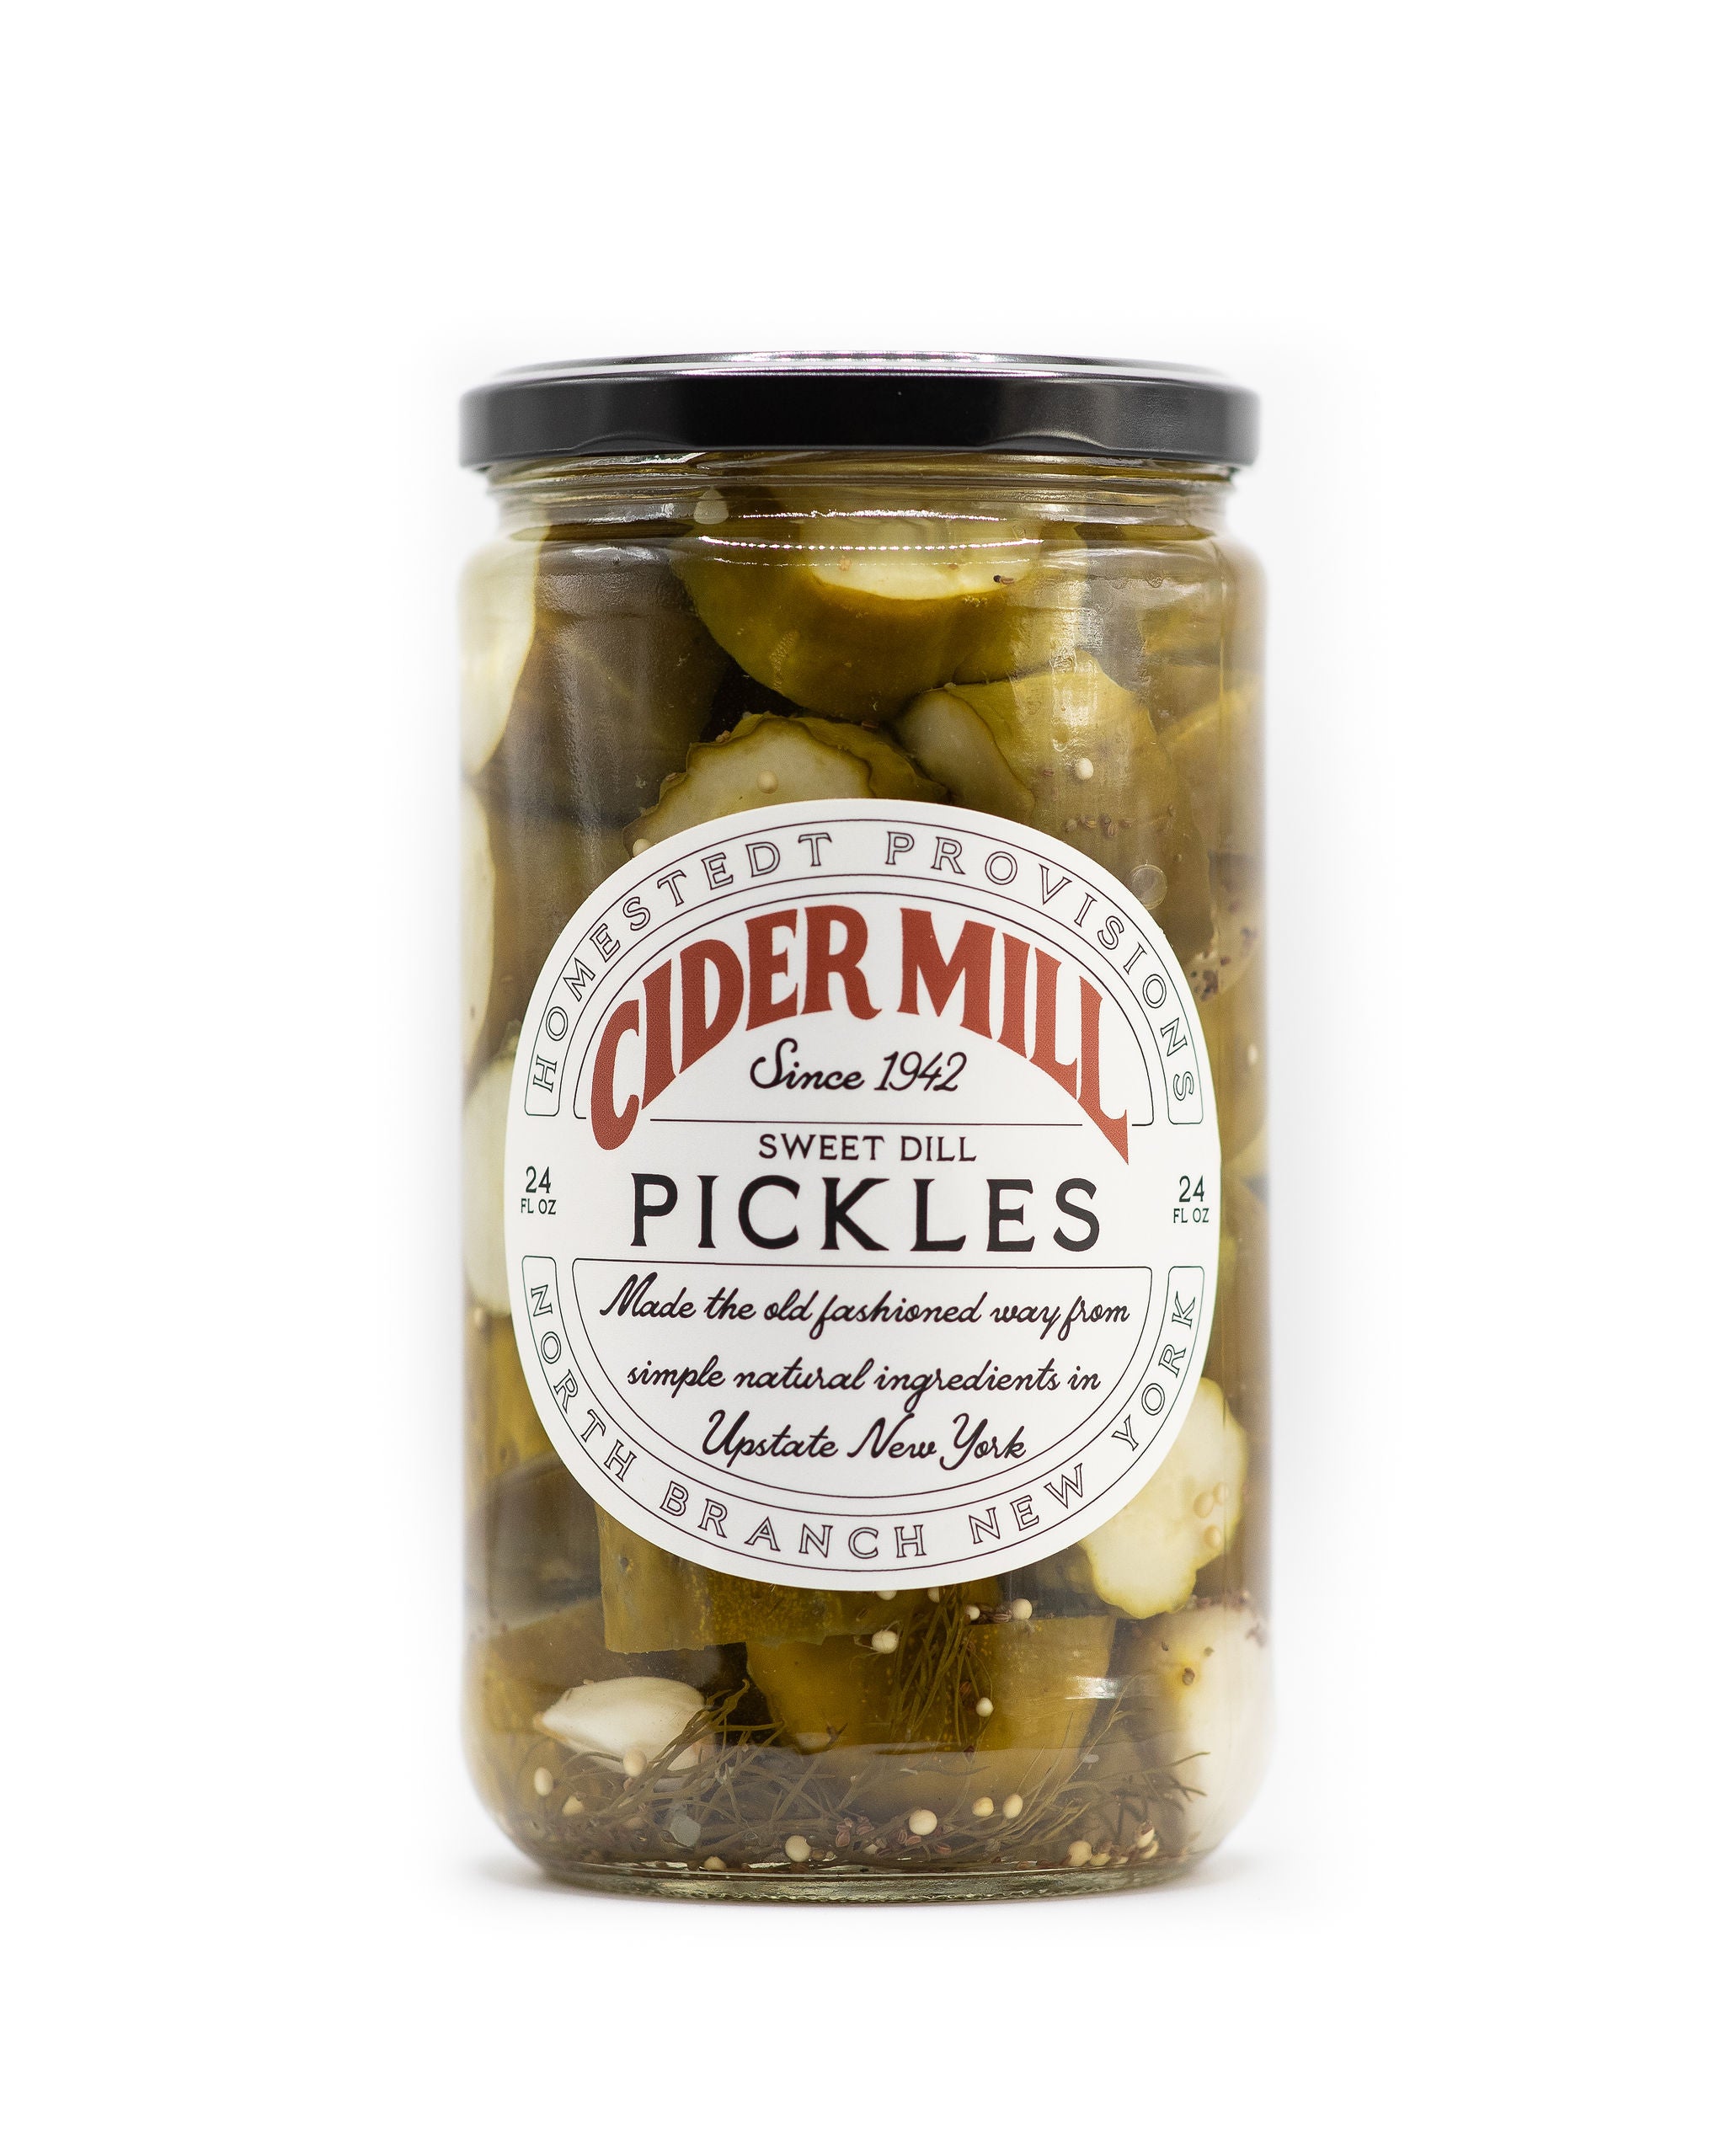 Cider Mill Sweet Dill Pickles